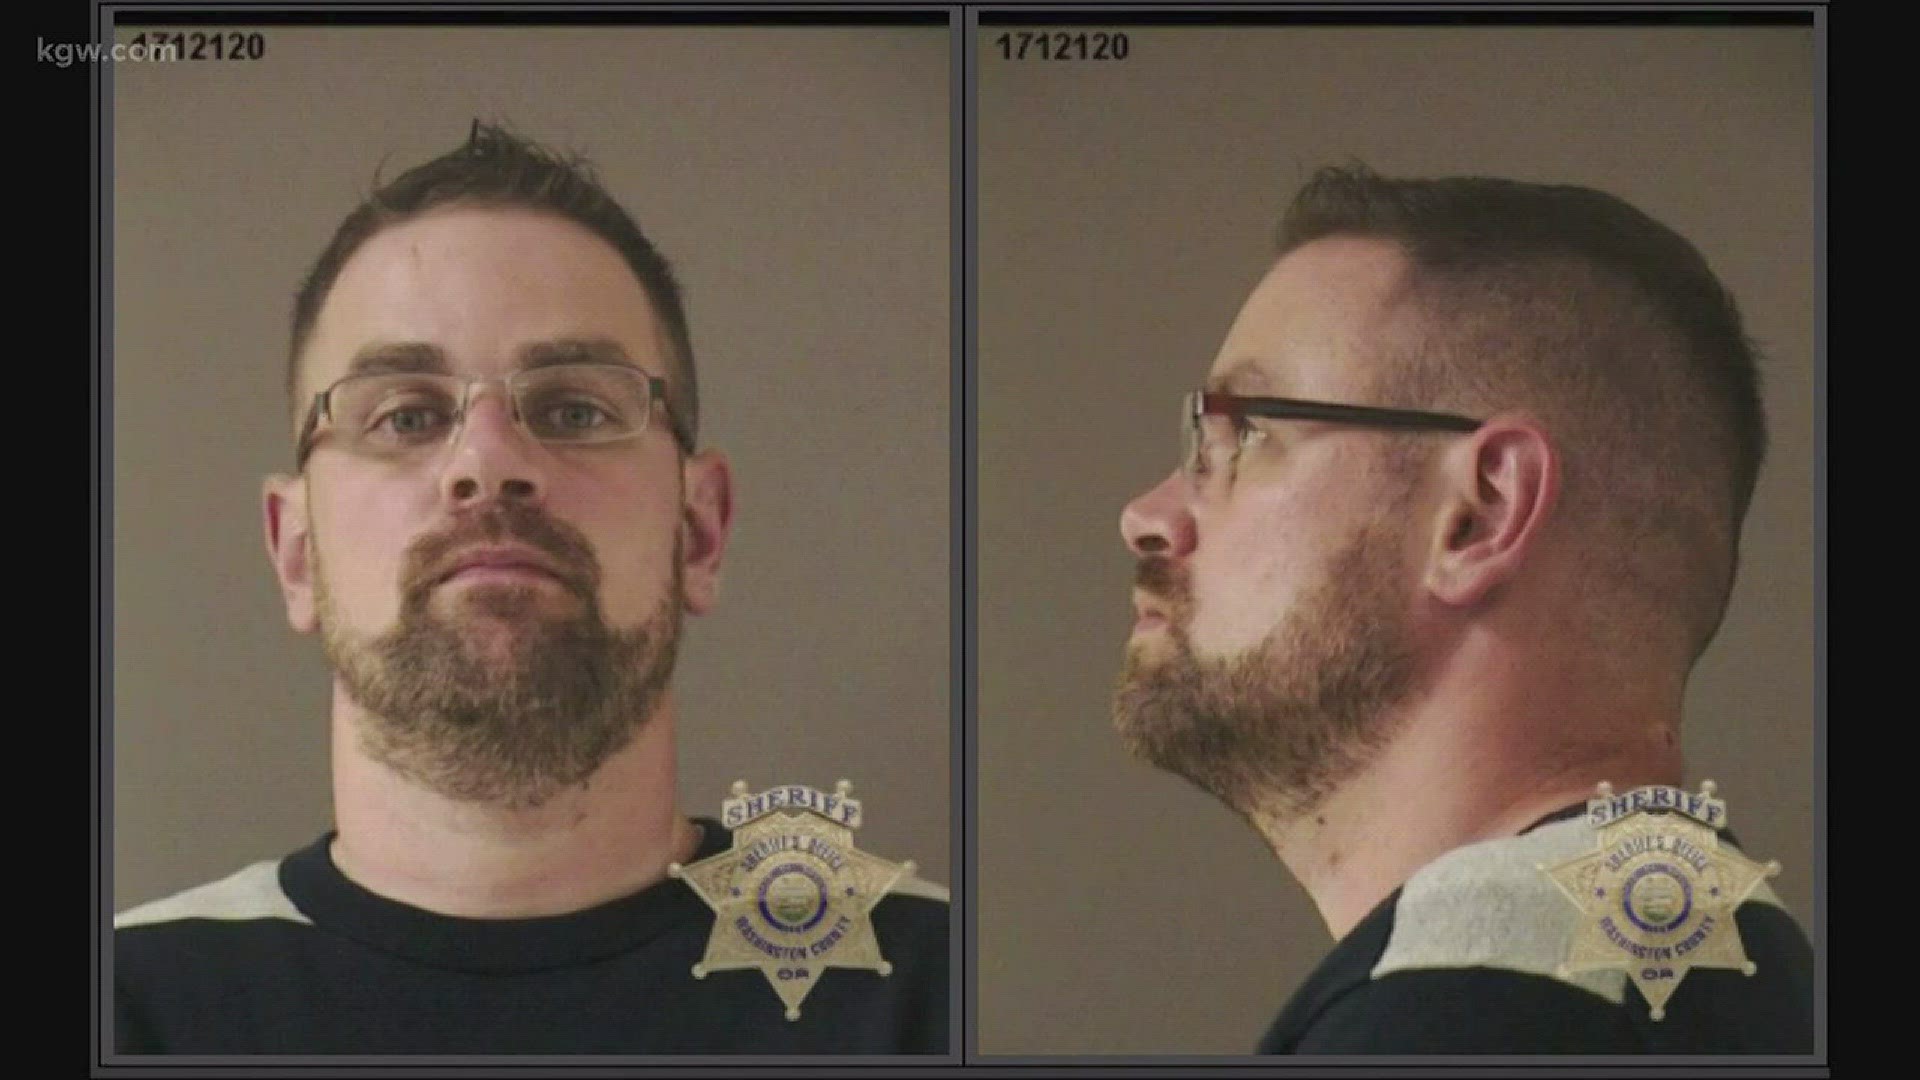 New documents allege trail of deceit involving an Oregon military impostor